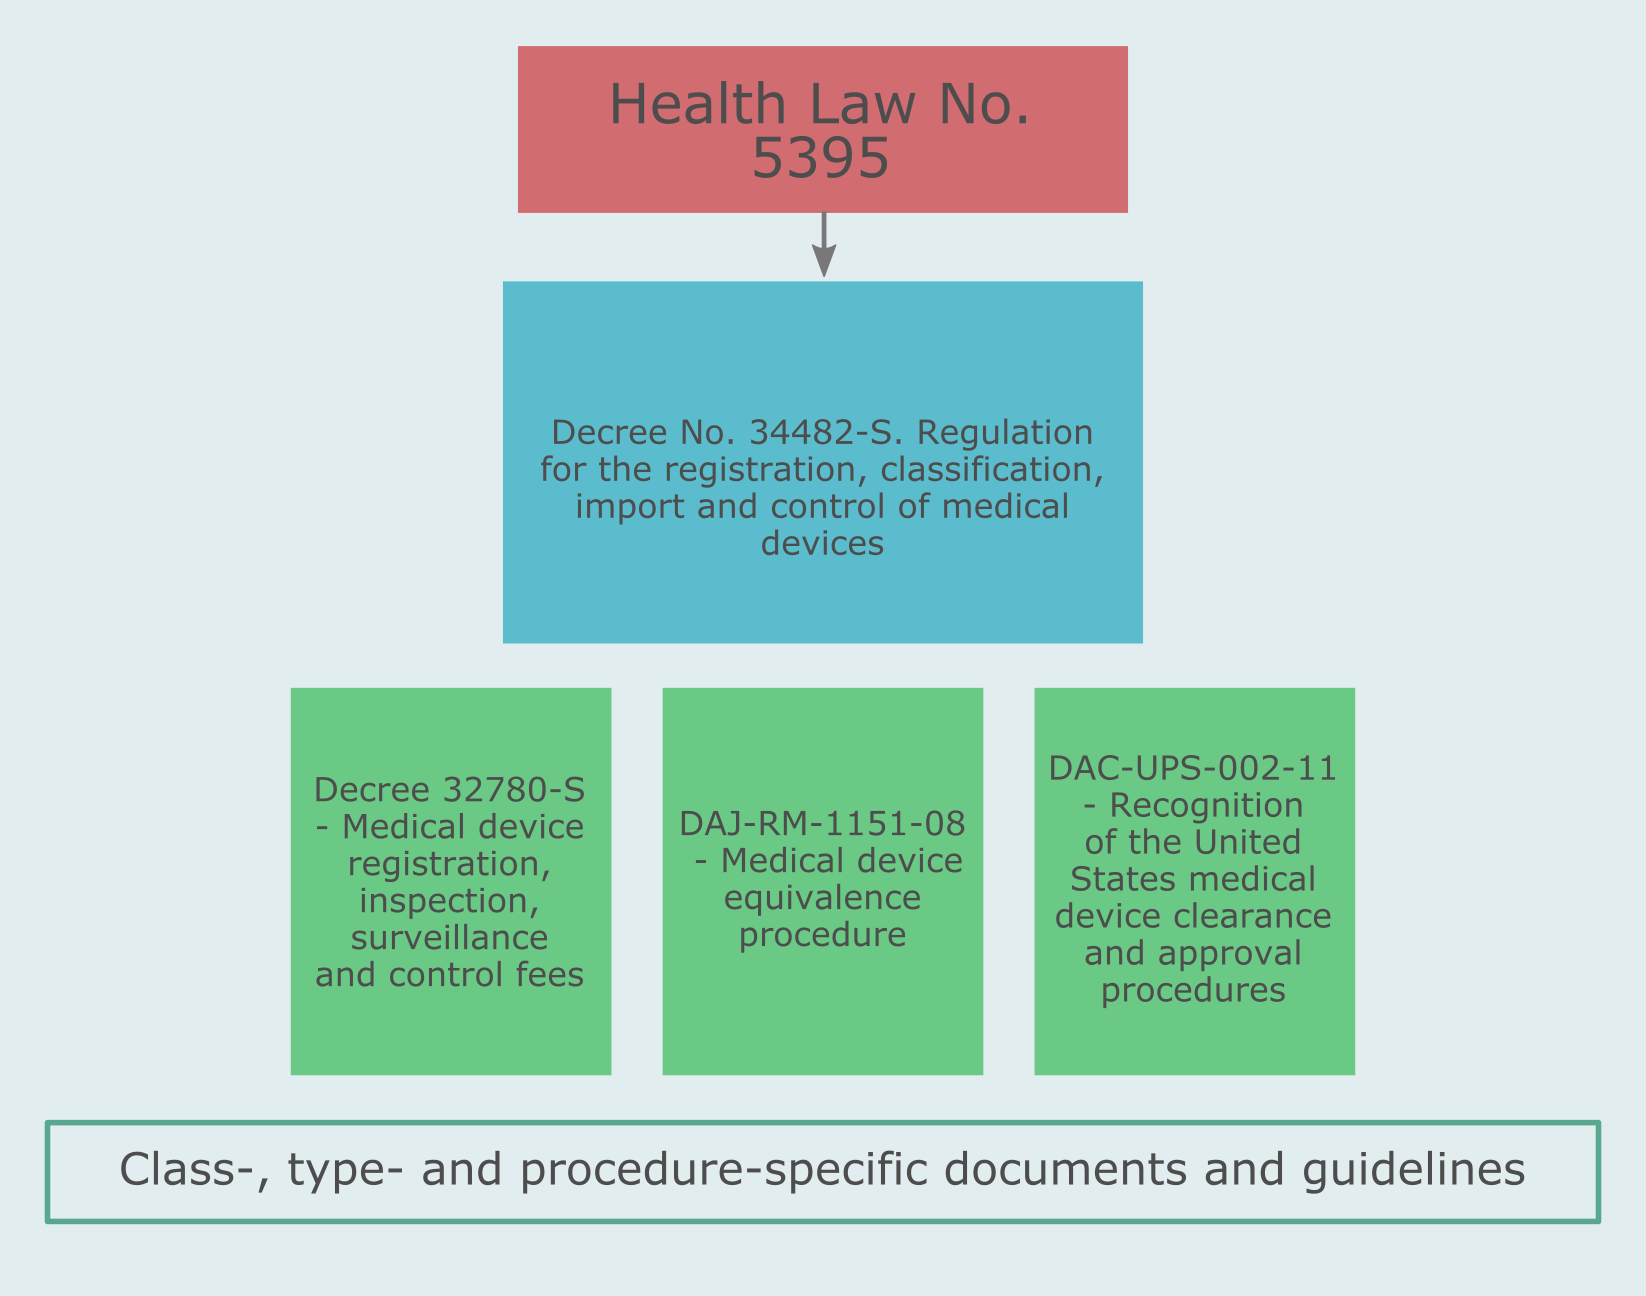 Medical device regulations of Costa Rica